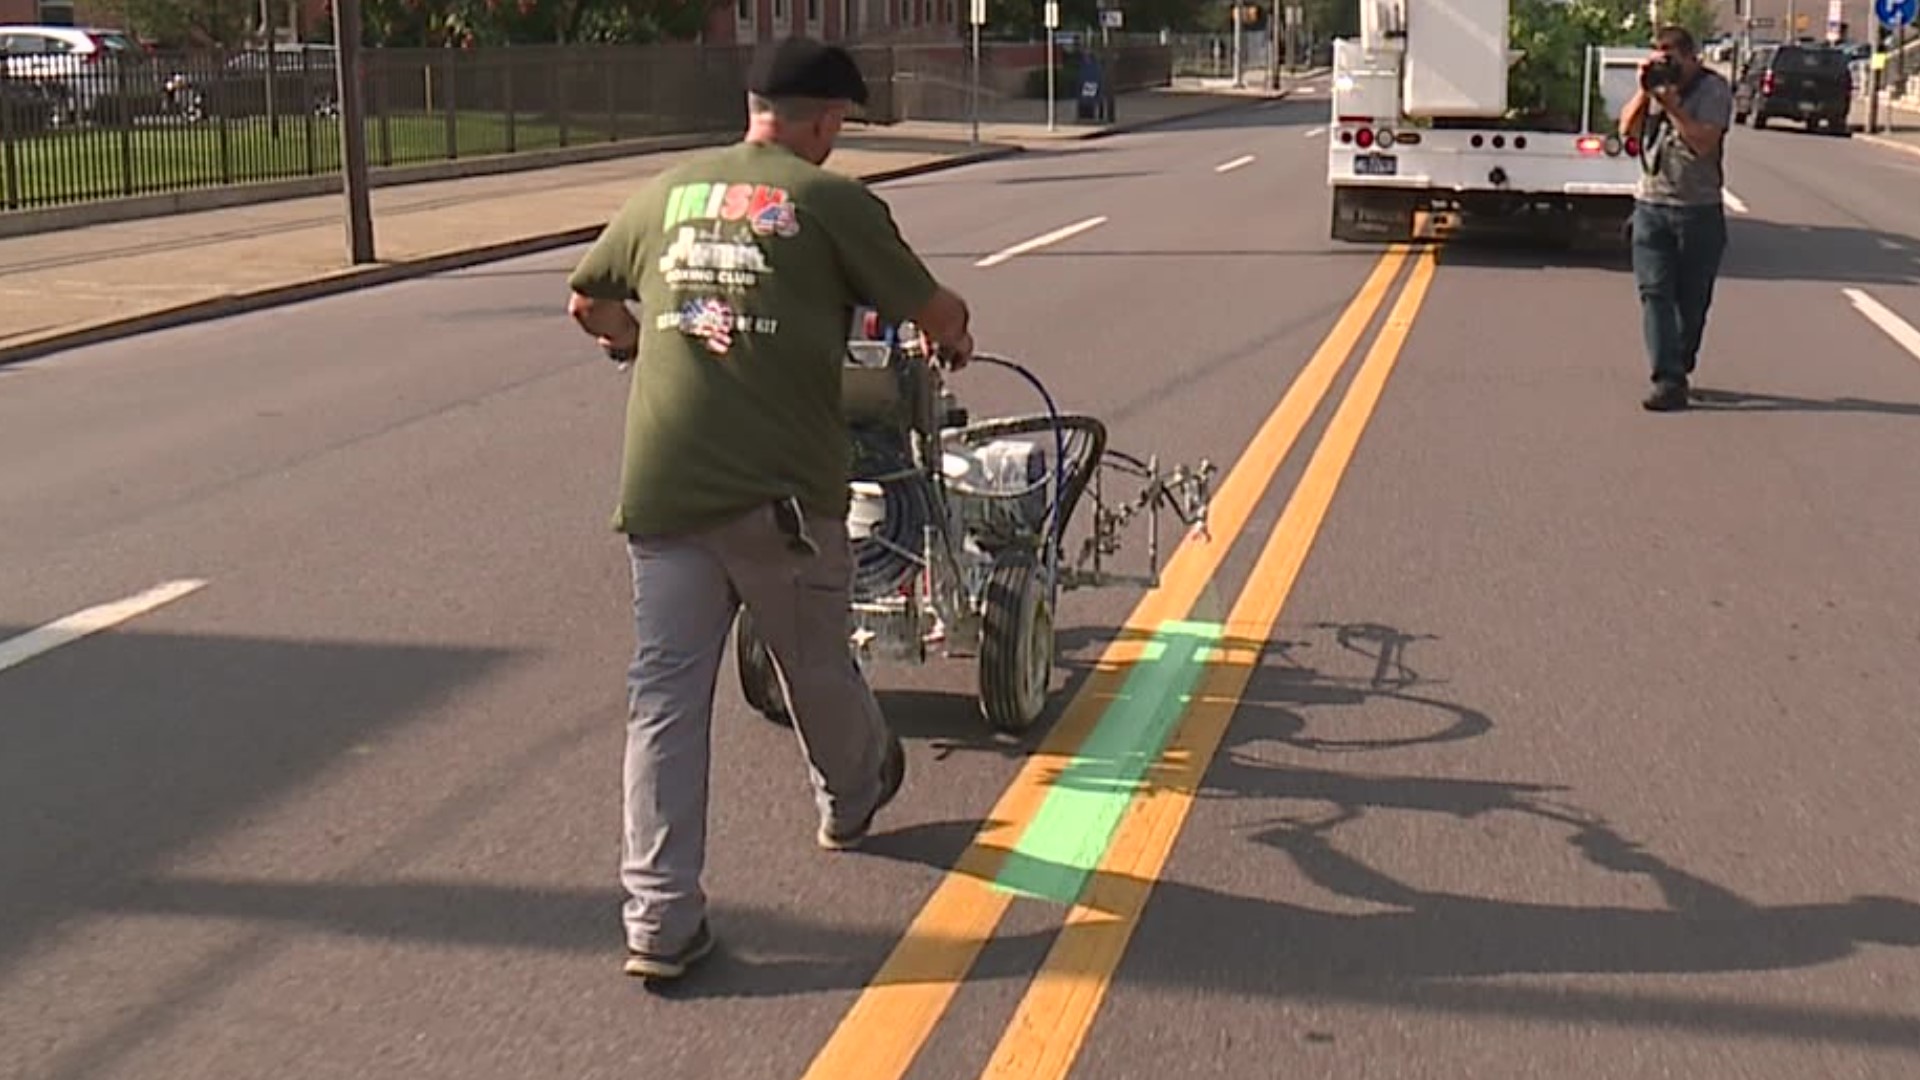 Crews were out Wednesday morning painting the green line for the parade route downtown.